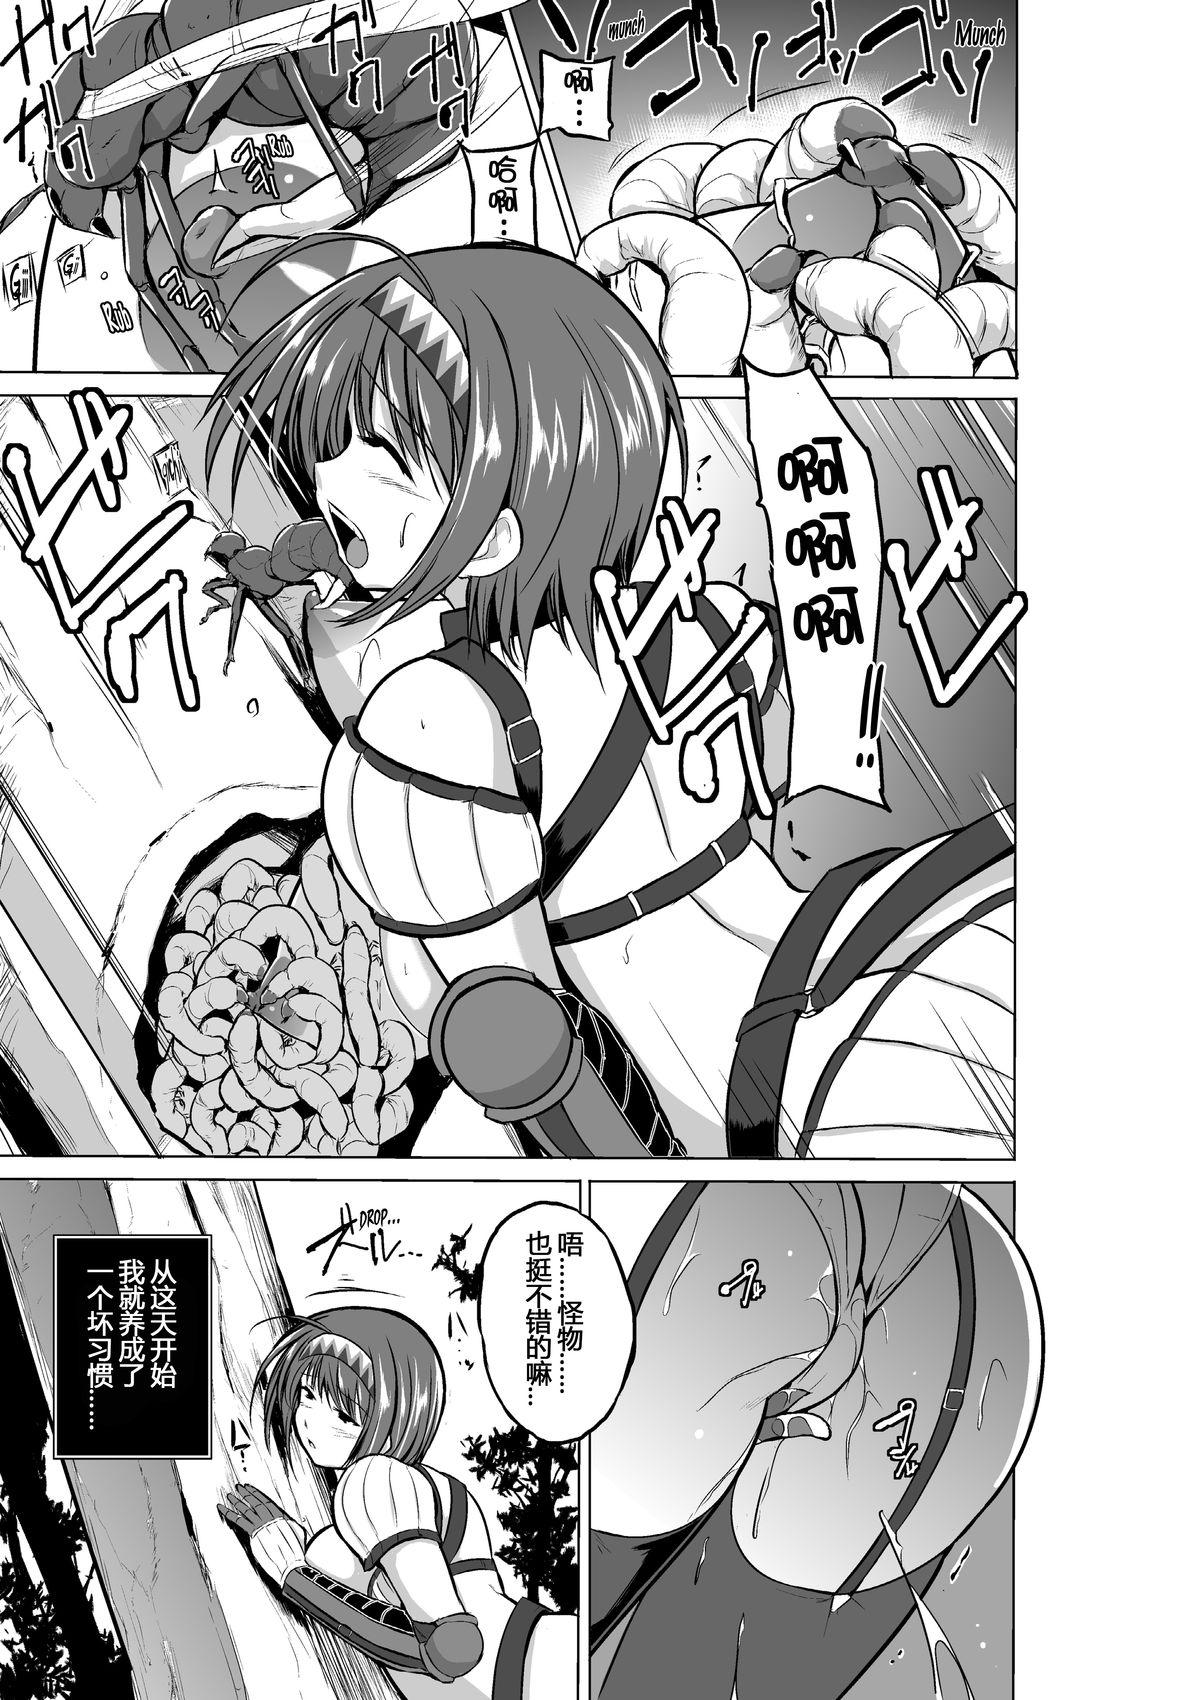 Big Boobs Dungeon Travelers - Chie no Himegoto - Toheart2 Hentai - Page 9